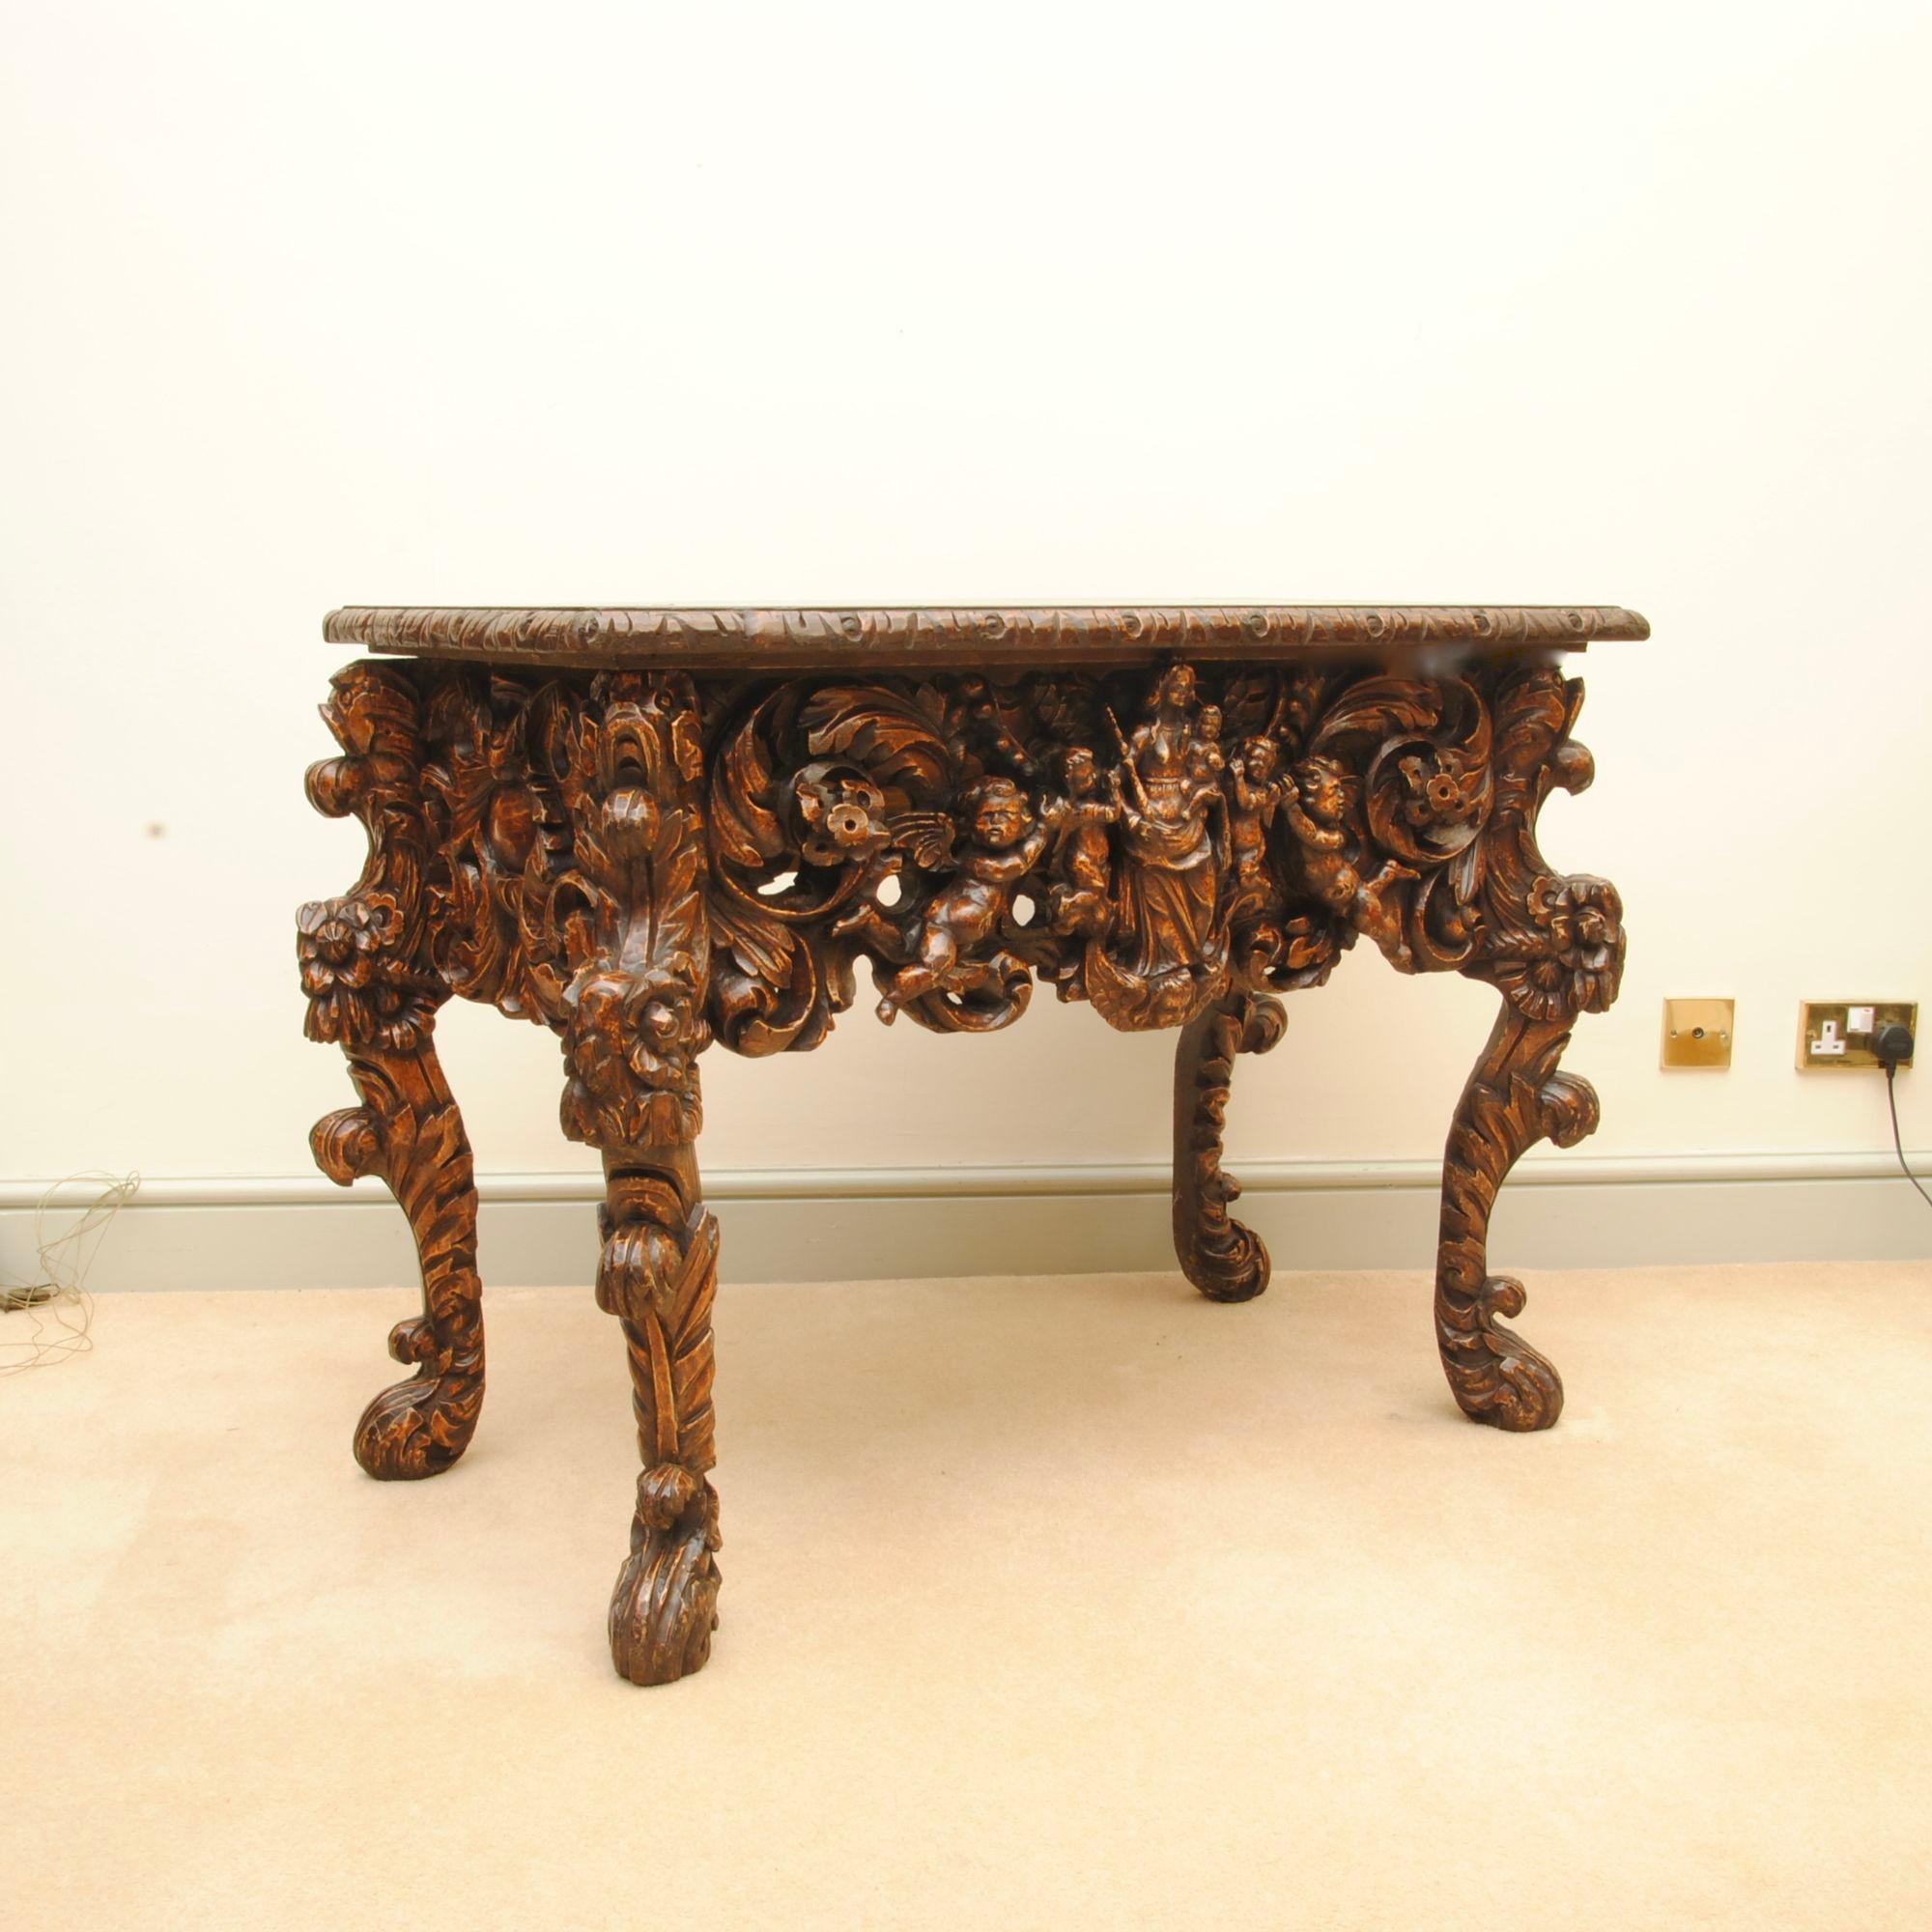 A rare early 18th century Dutch carved console table with cabriole legs. The finely decorated frieze with figures and flowers surrounded by scrolling acanthus.